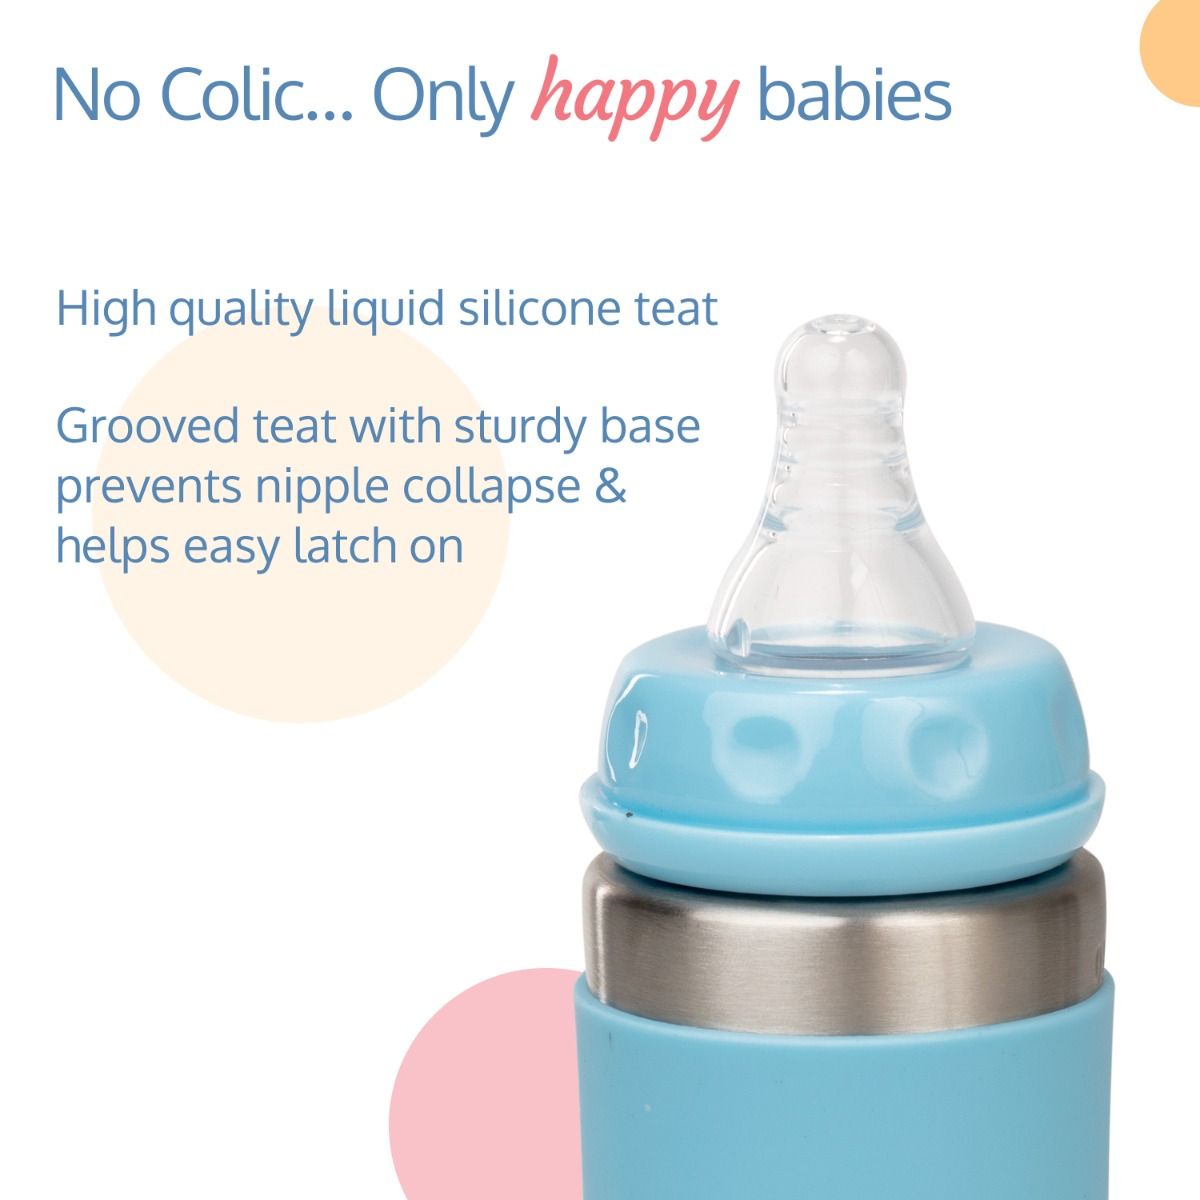 LuvLap 4-in-1 Stainless Steel Baby Bottle/Sipper SS304, Anti-Colic, Odor-Free, with Handles 19422 - 240ml- SkyBlue